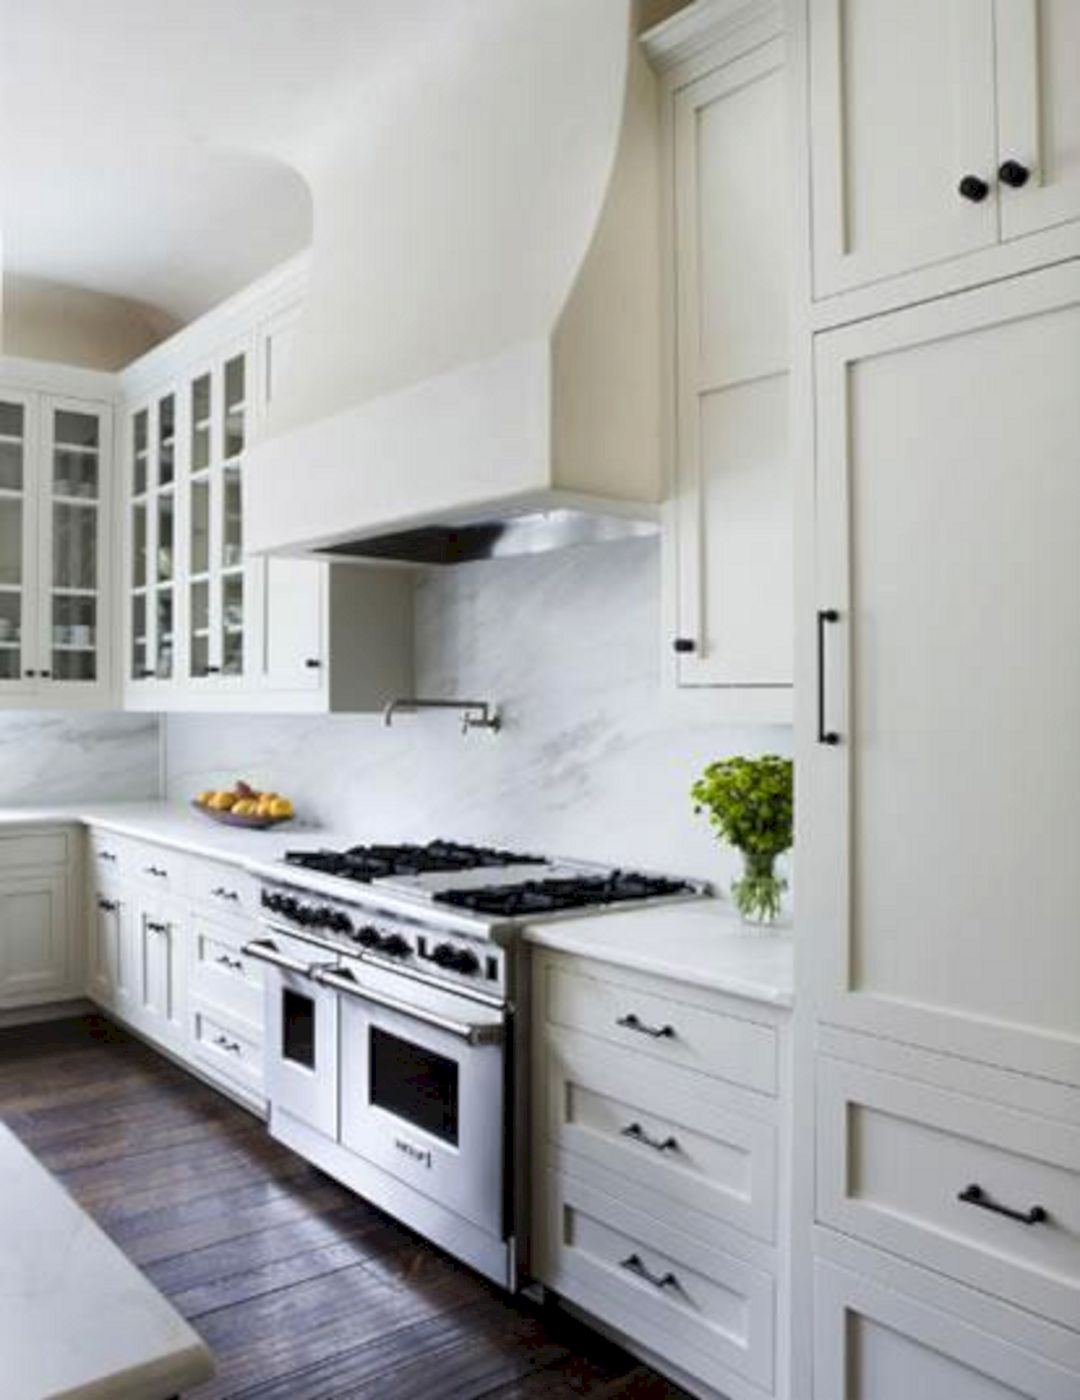 IKEA Kitchen Cabinets With White Marble Countertop (IKEA Kitchen Cabinets With White Marble ...